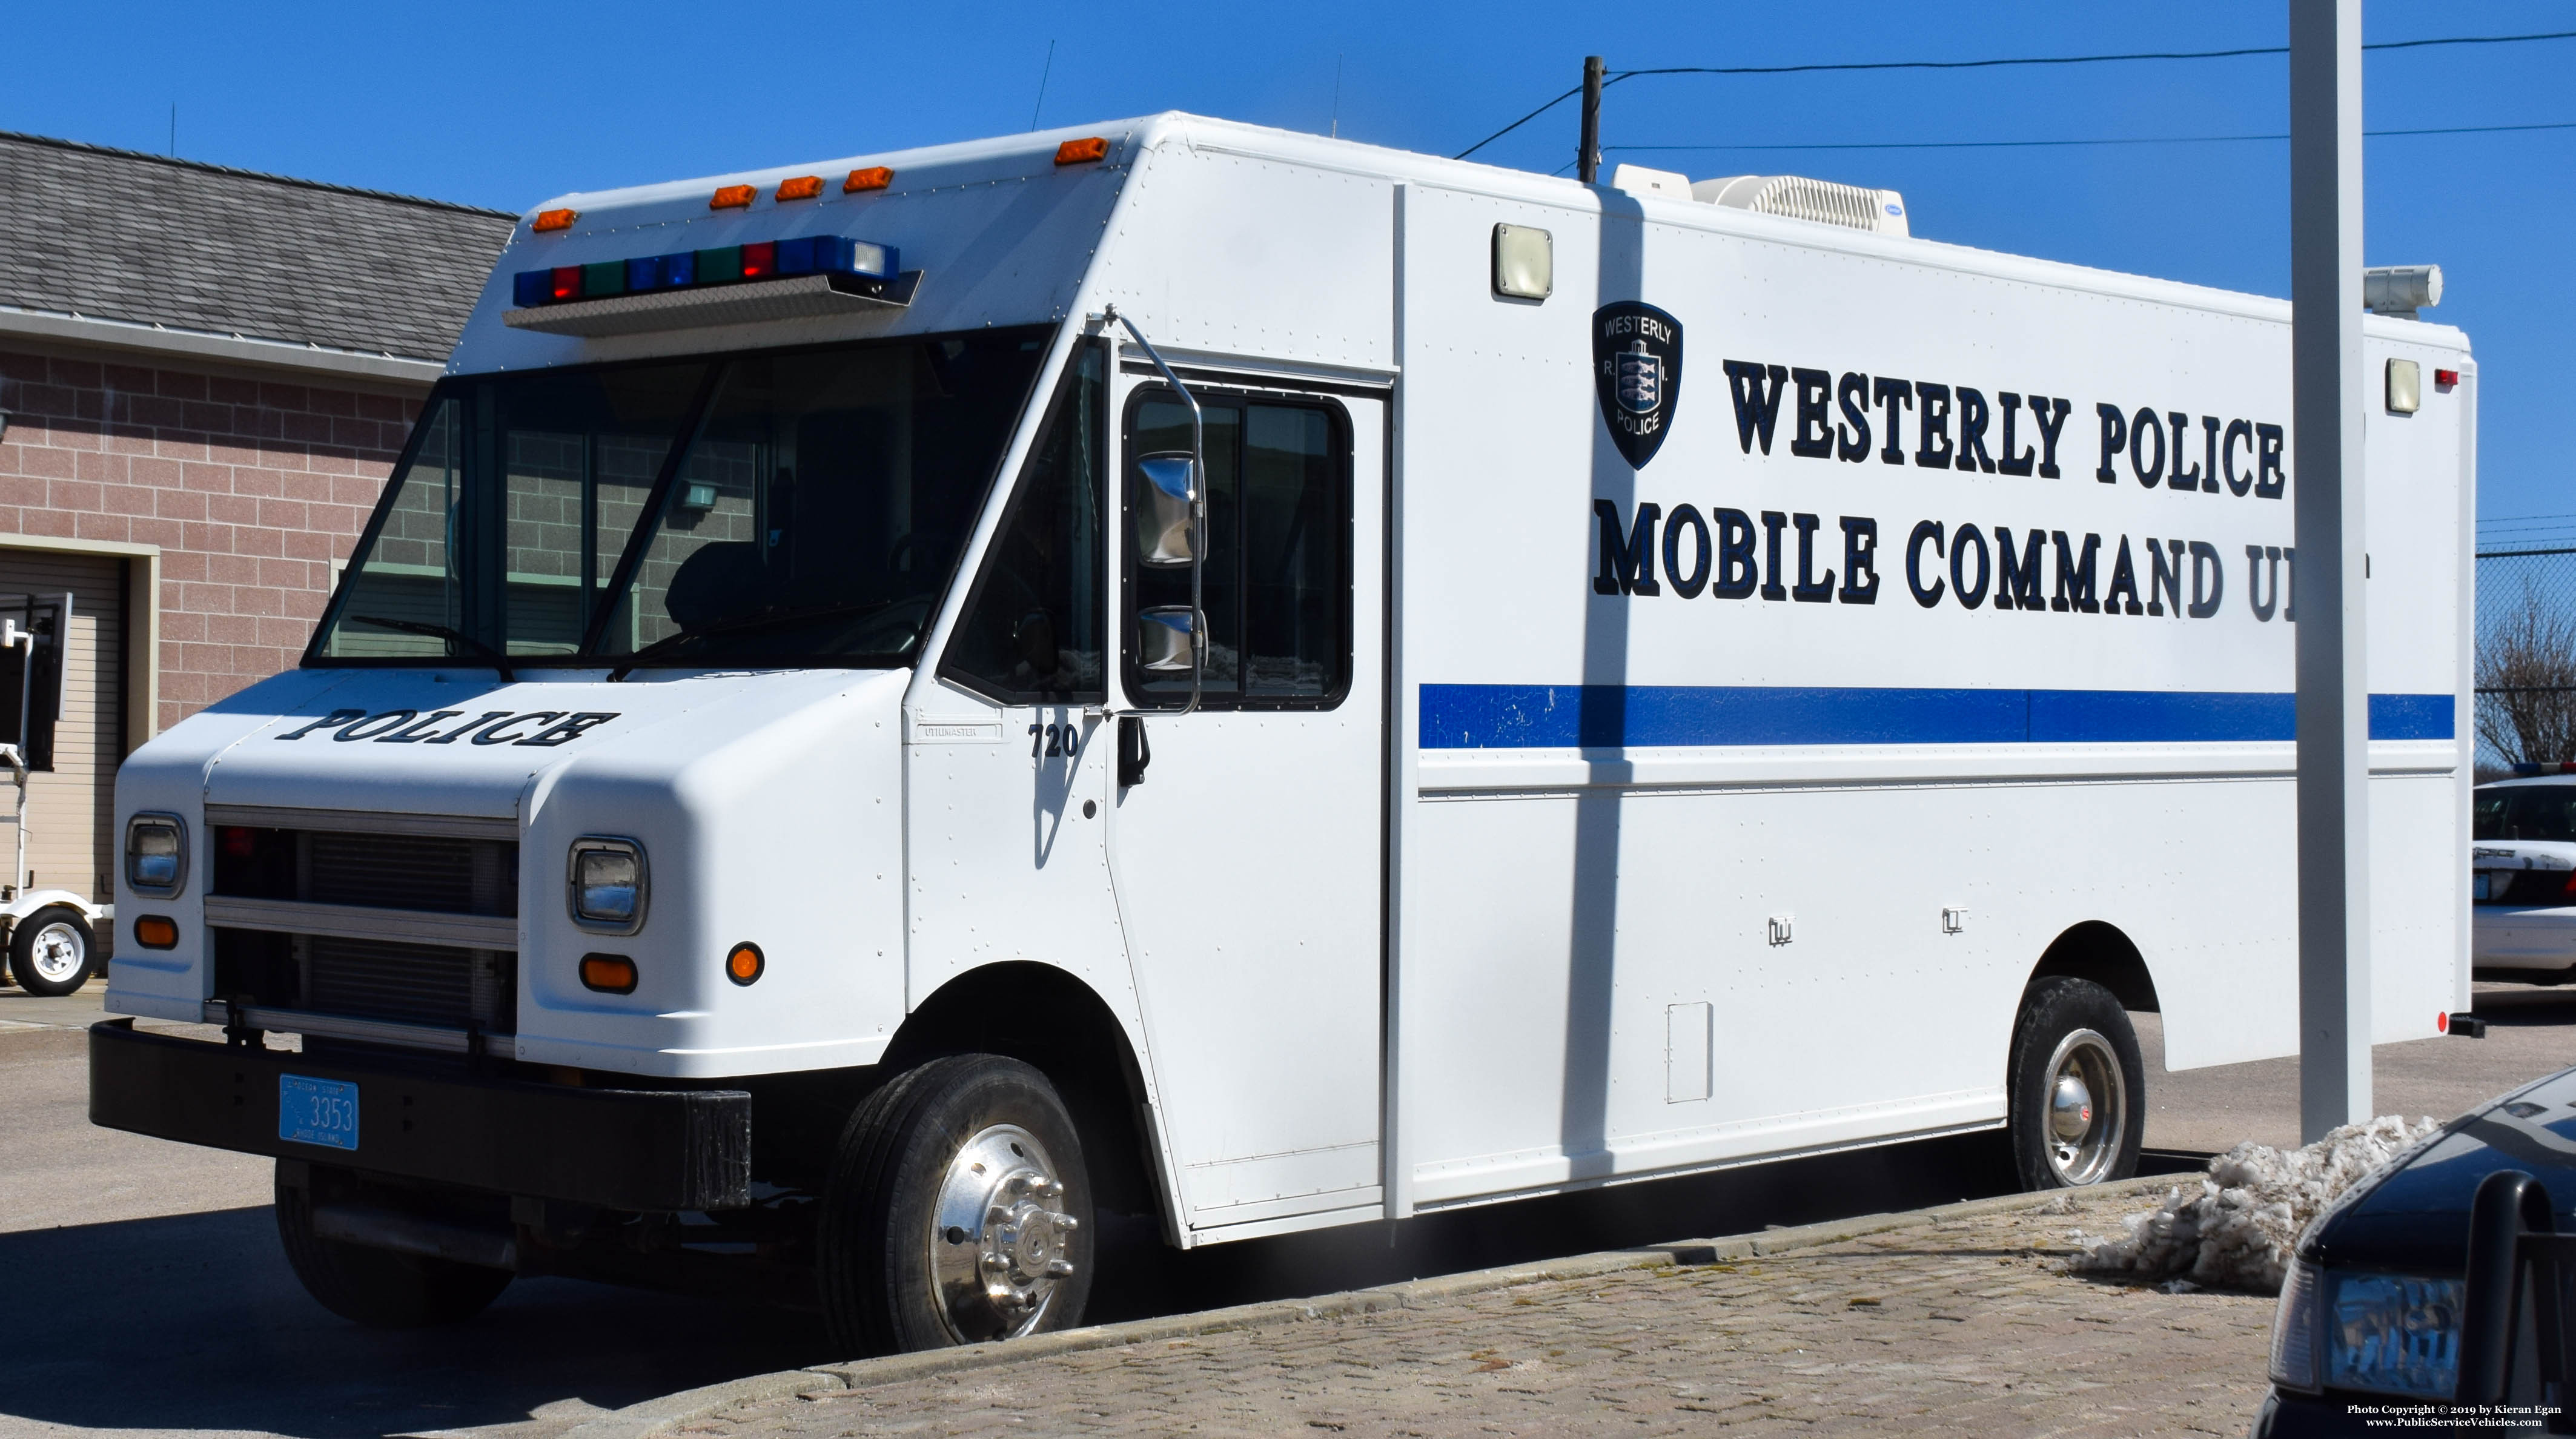 A photo  of Westerly Police
            Mobile Command 720, a 1997-2008 Ford Ultimaster             taken by Kieran Egan